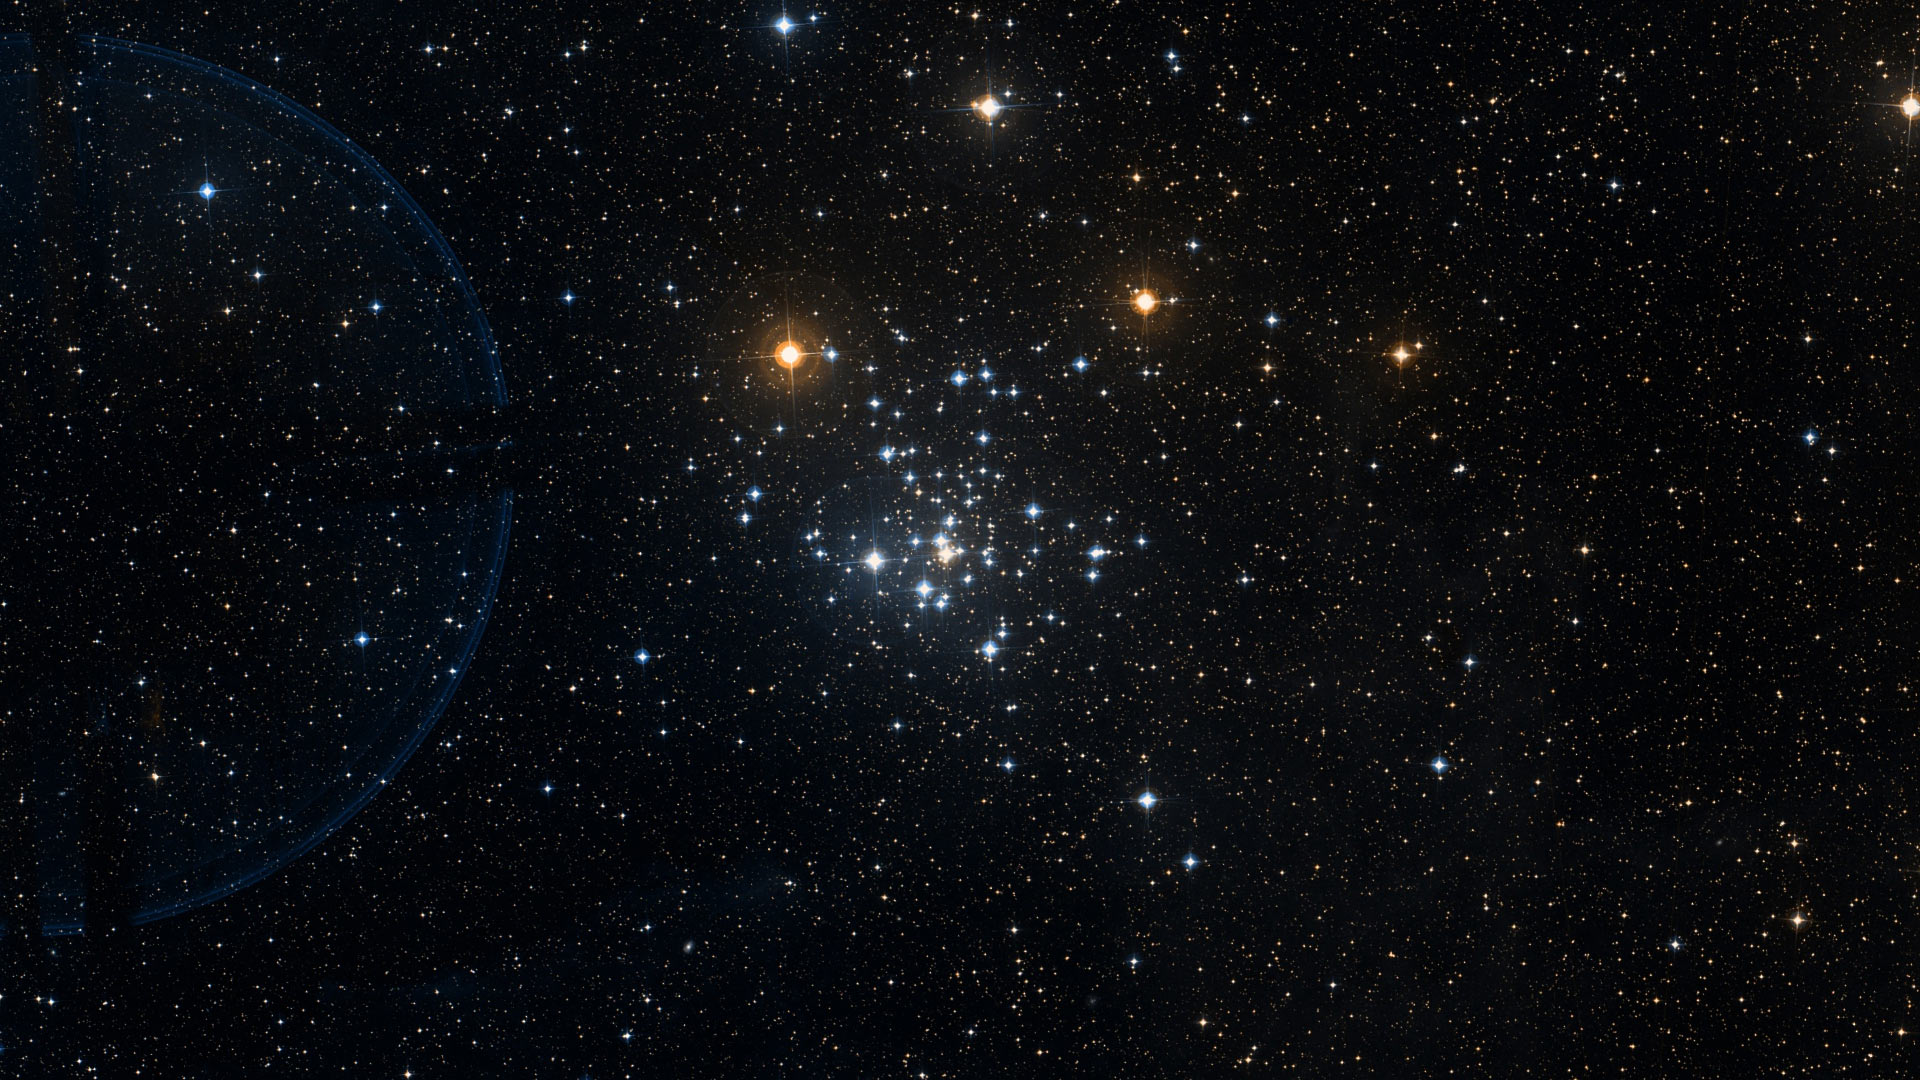 Star Clusters Are More Than Our Binoculars Can See